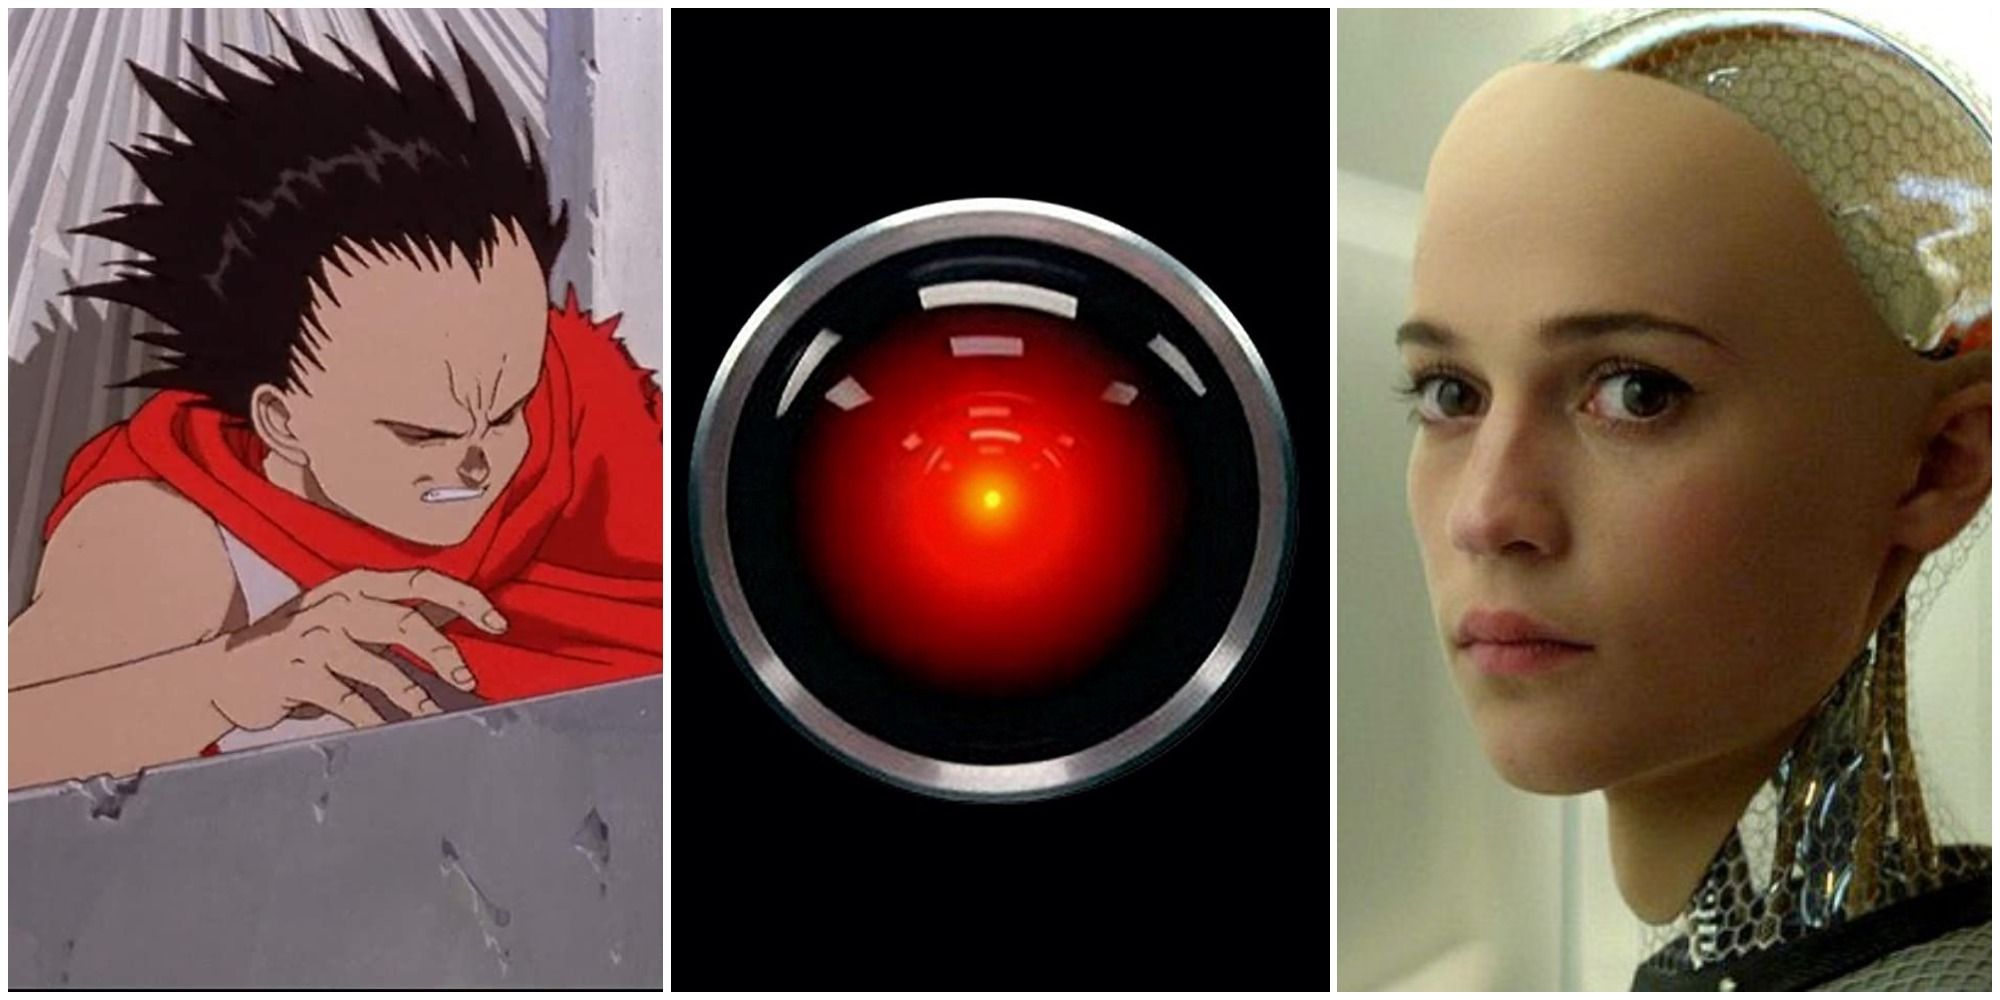 Tetsuo, Hal-9000, Ava from Ex Machina collage